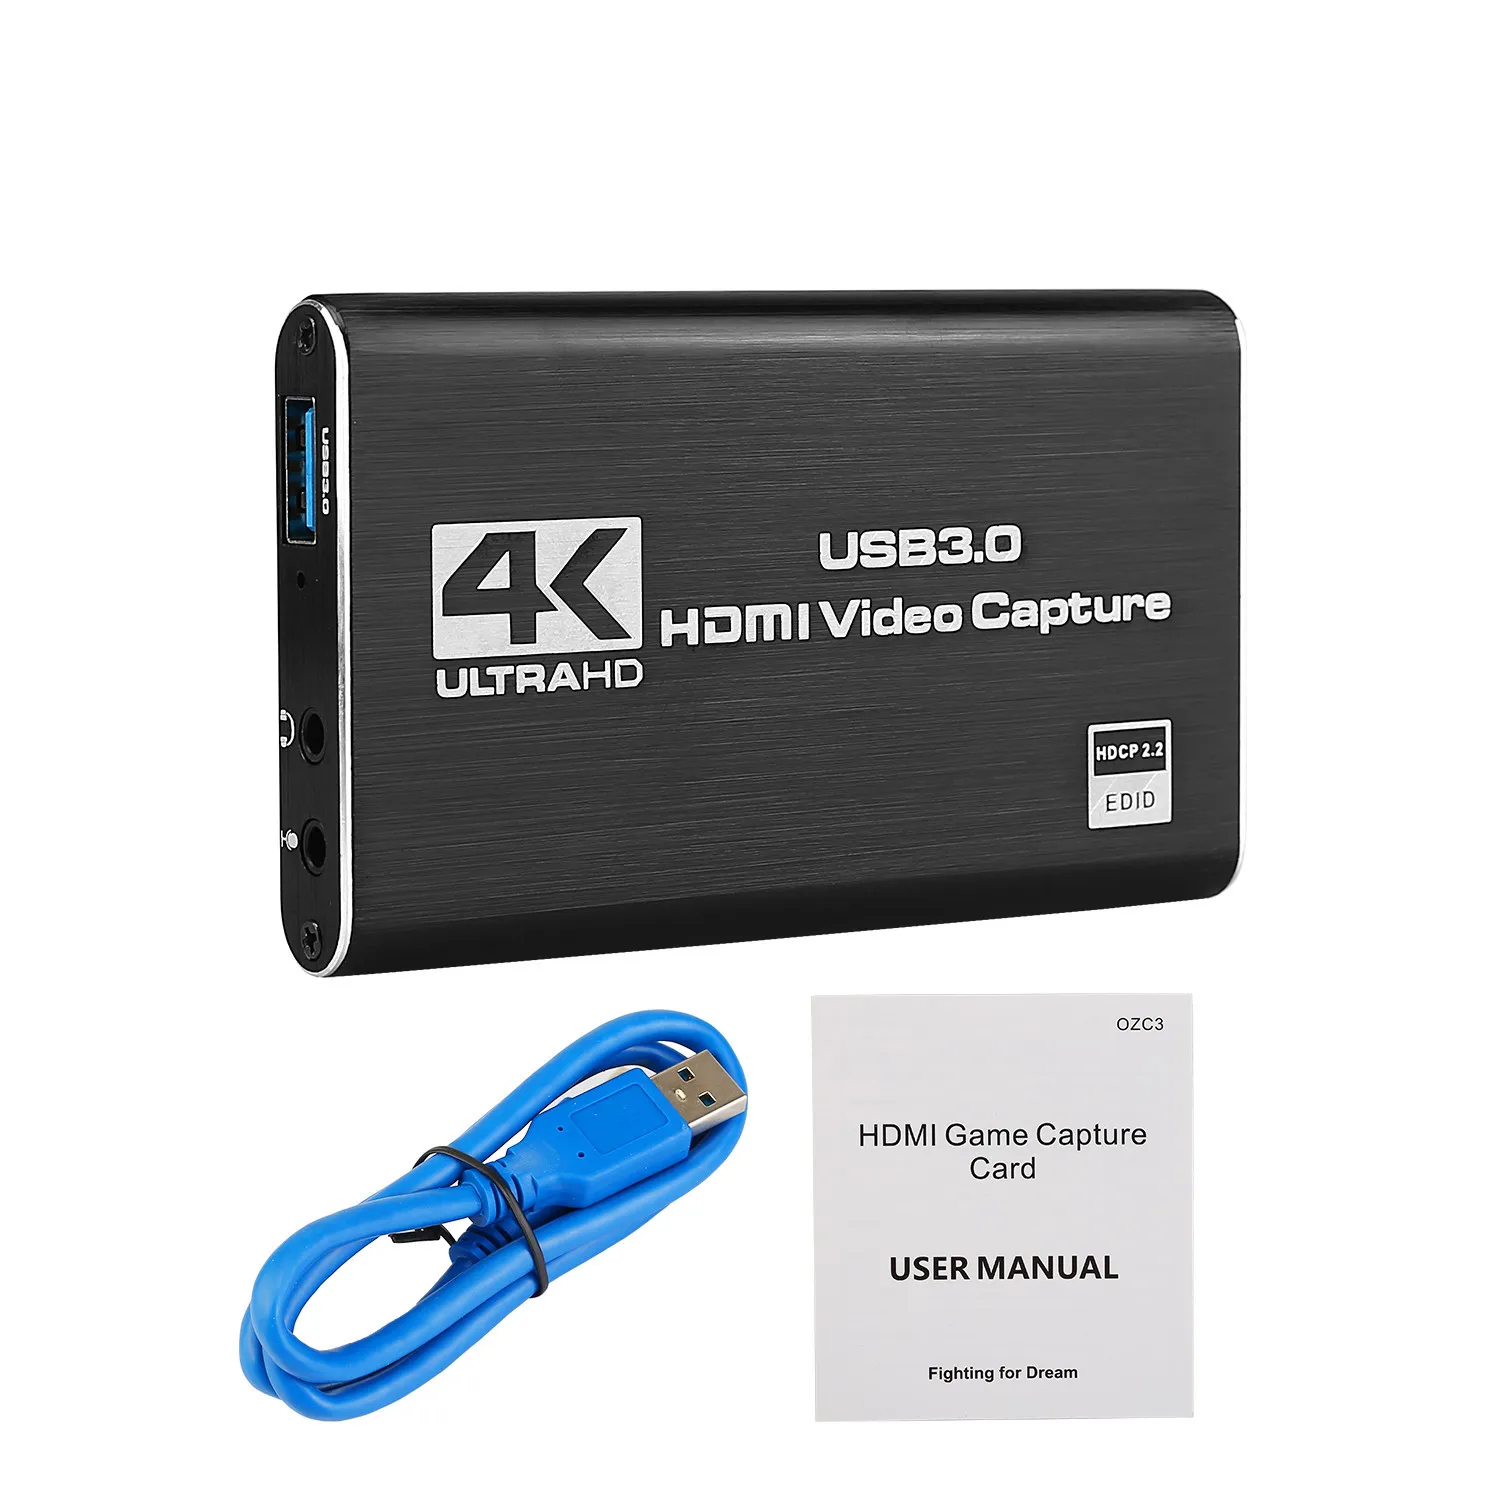 

HDMI Capture Card 4K USB3.0 1080P Video Capture Card Game Capture Device for PC PS4 Live Streaming Broadcast Video Record Stream